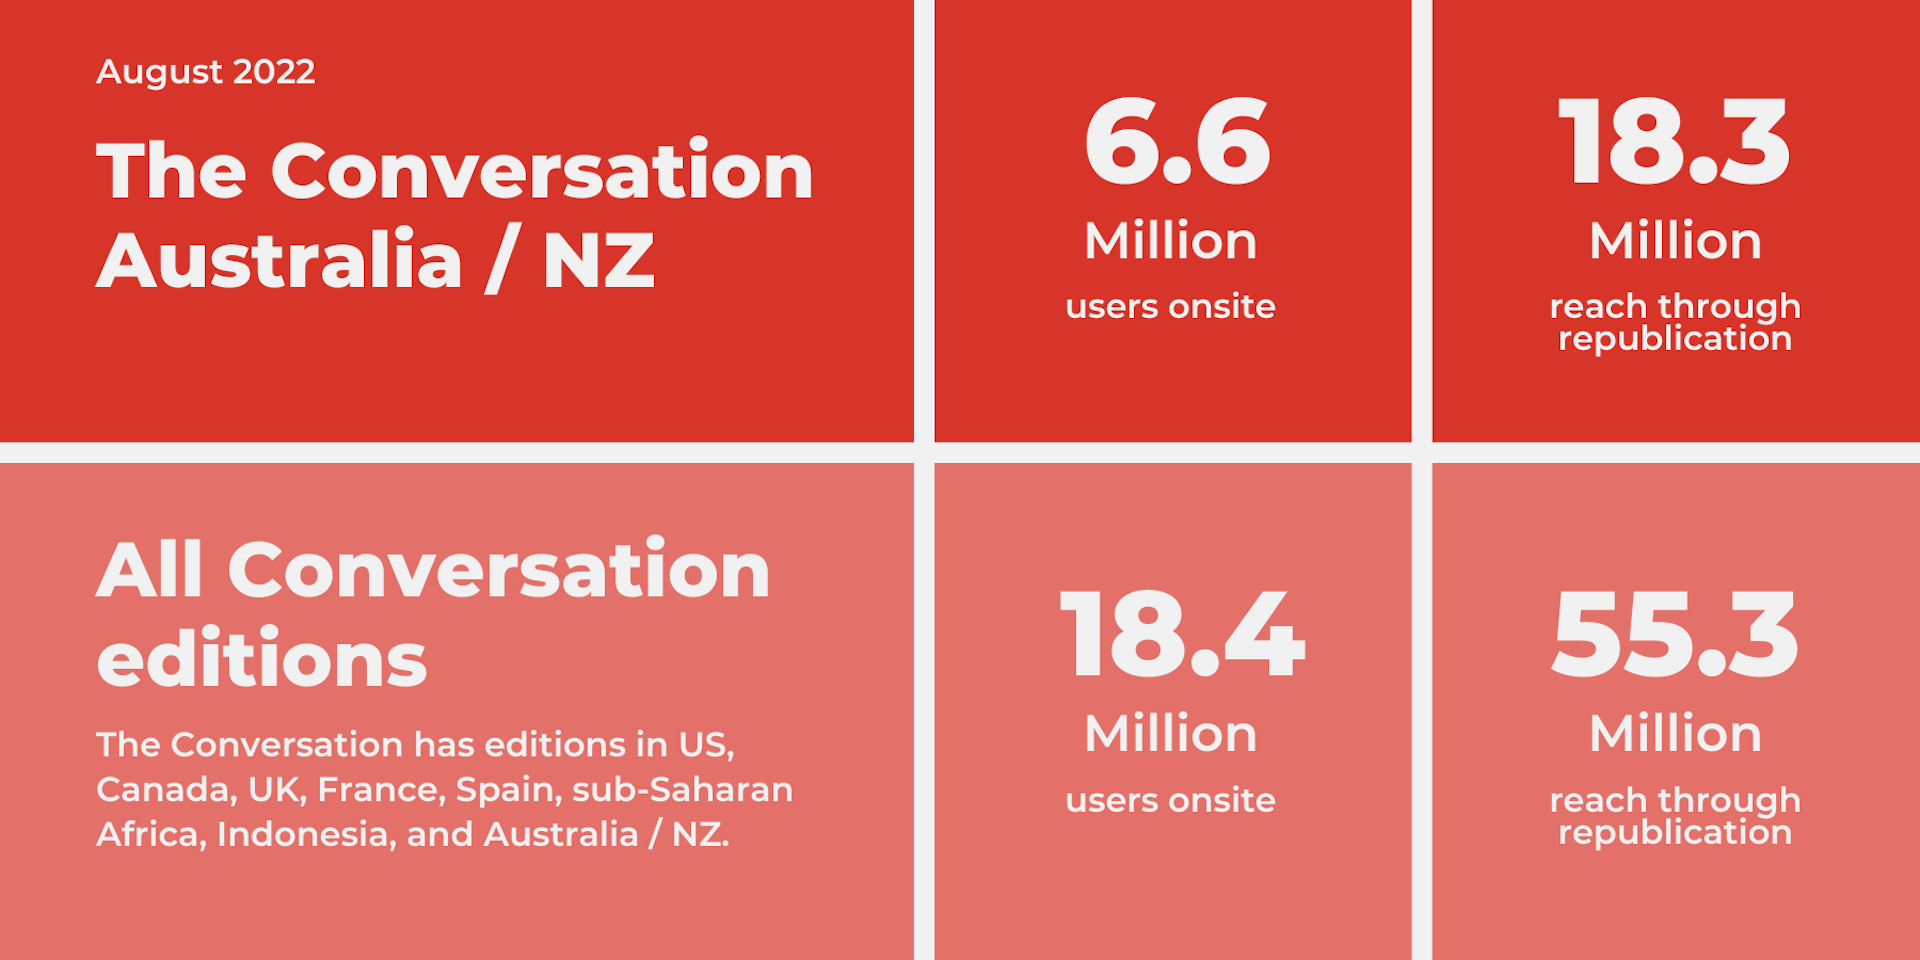 Readership of The Conversation Australia and New Zealand editions